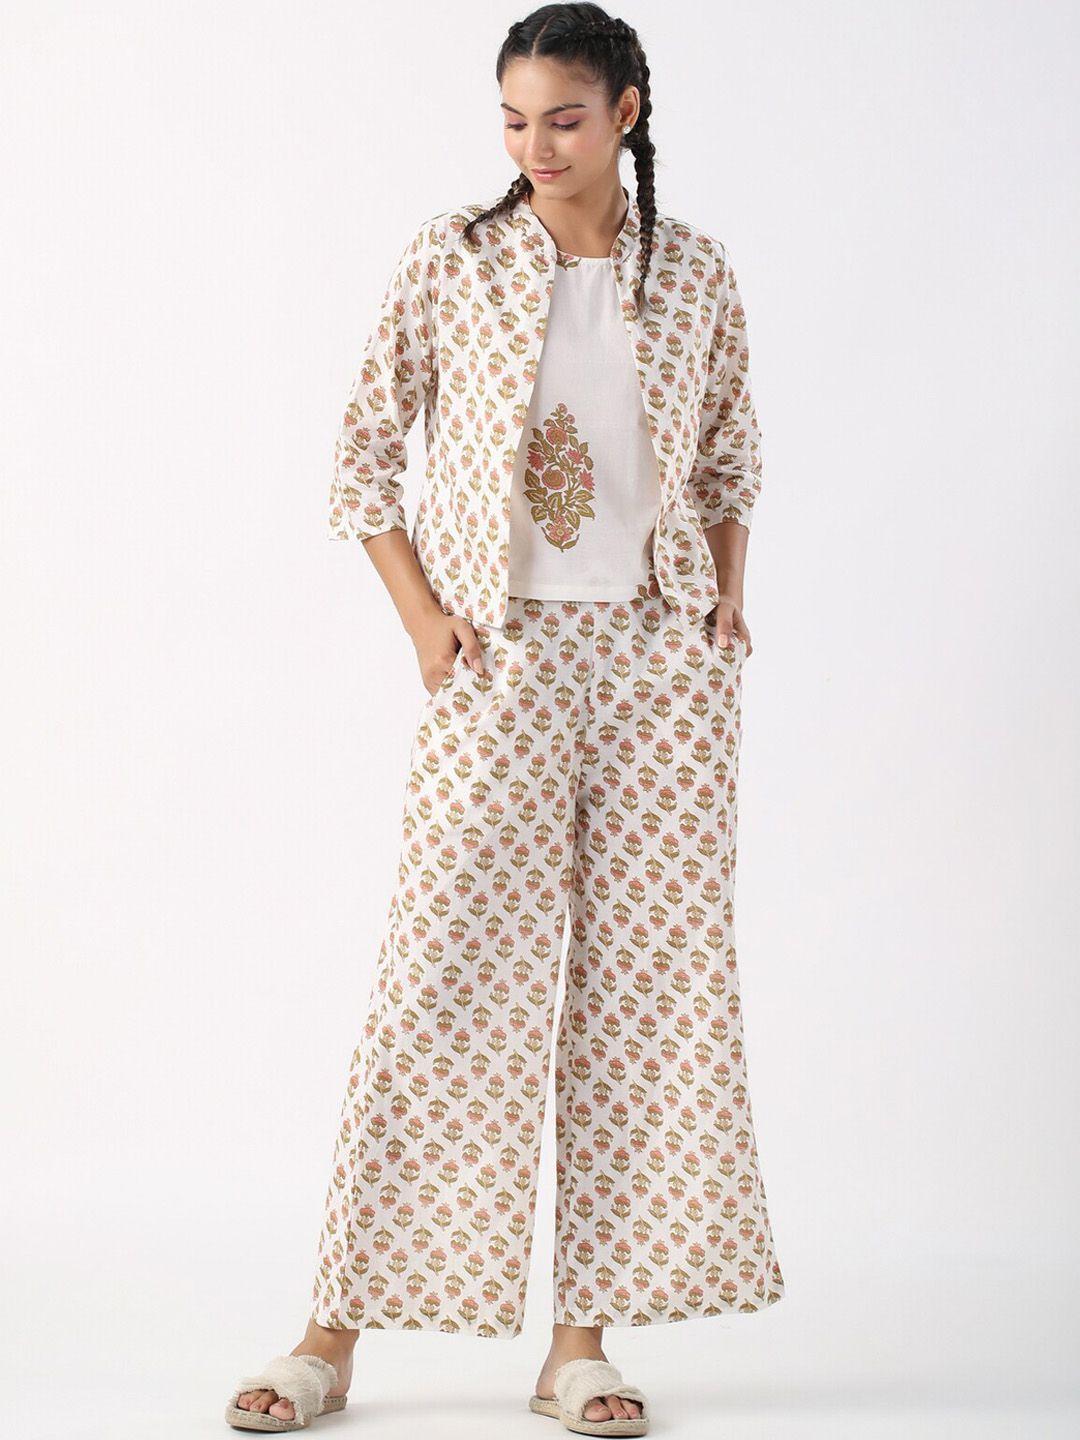 jisora-off-white-floral-printed-pure-cotton-night-suit-with-shrug